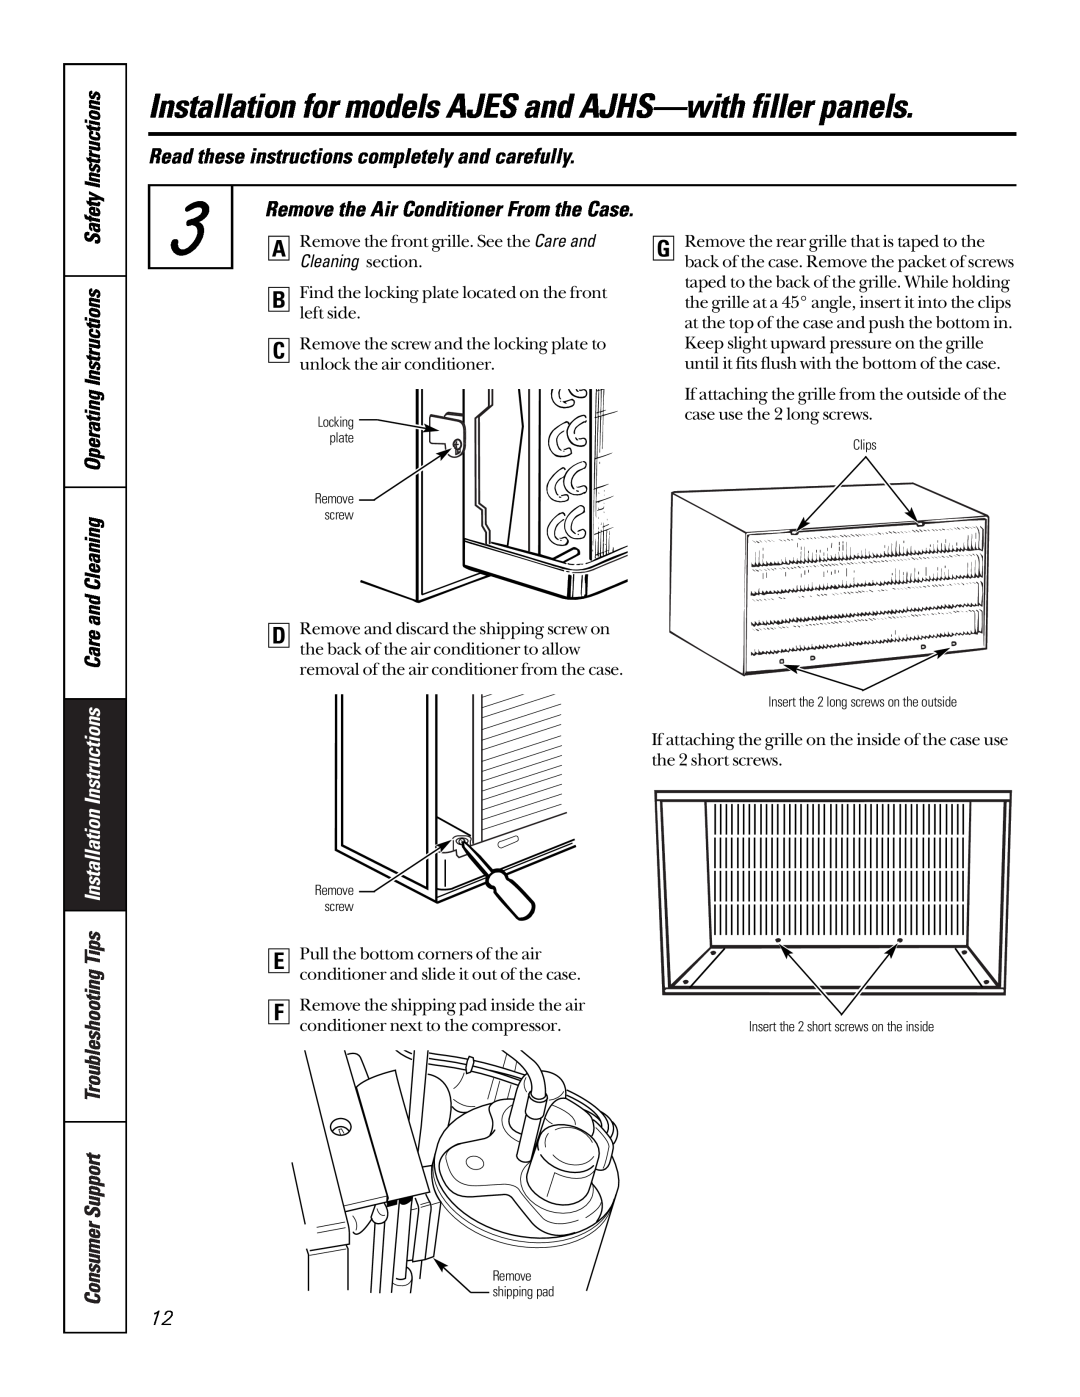 GE 10 AZA Instructions, Read these instructions completely and carefully, Remove the Air Conditioner From the Case 